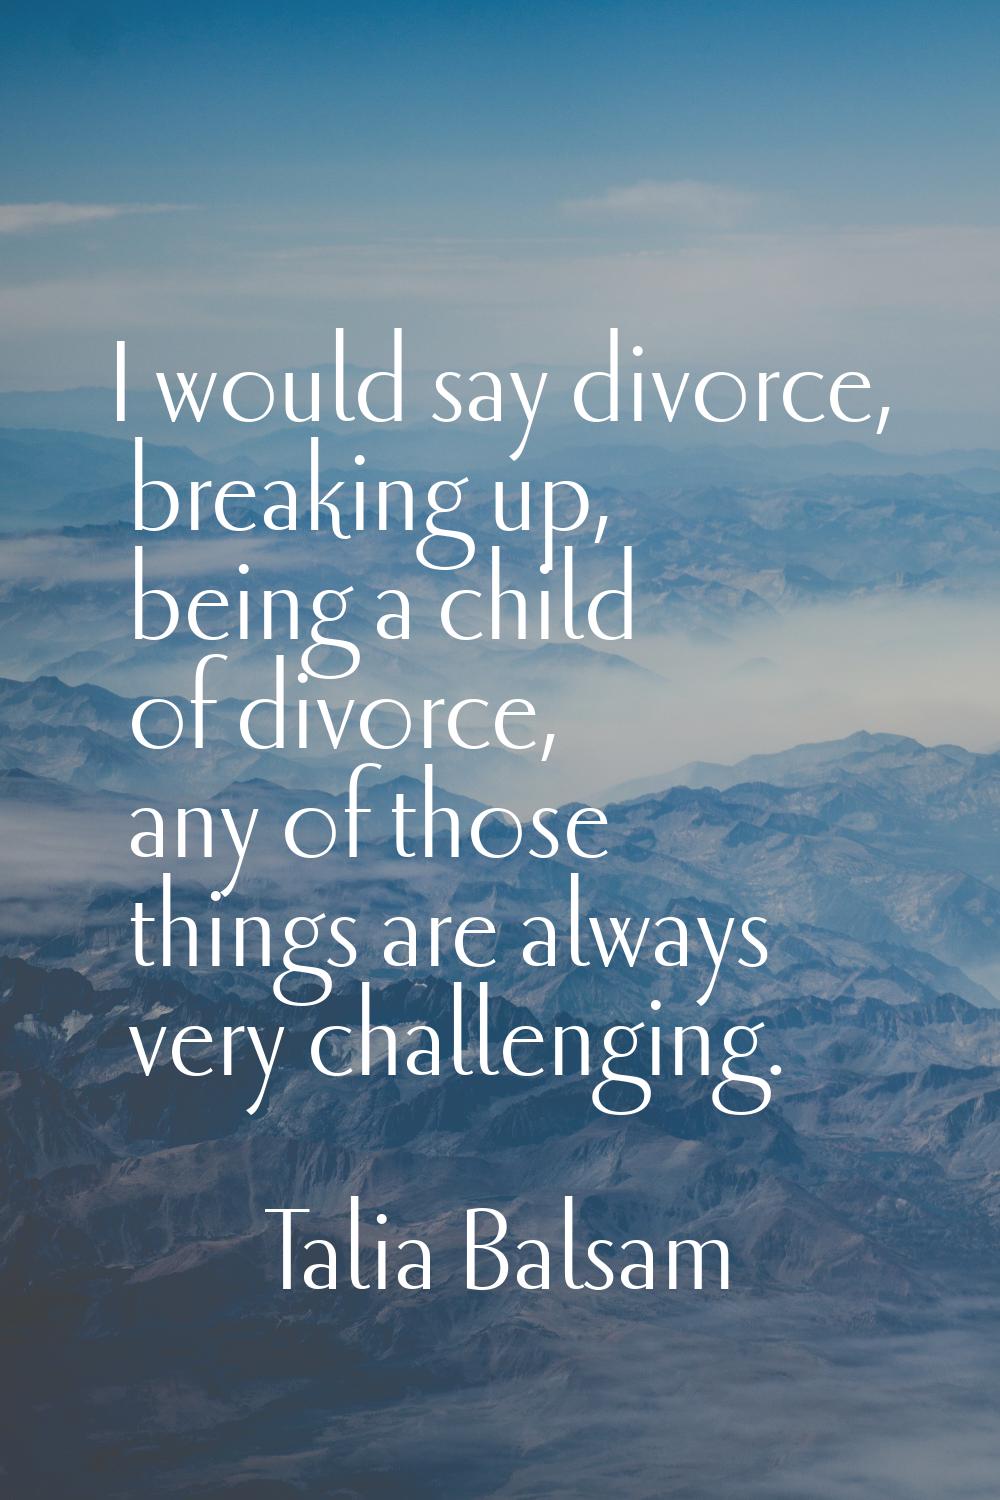 I would say divorce, breaking up, being a child of divorce, any of those things are always very cha